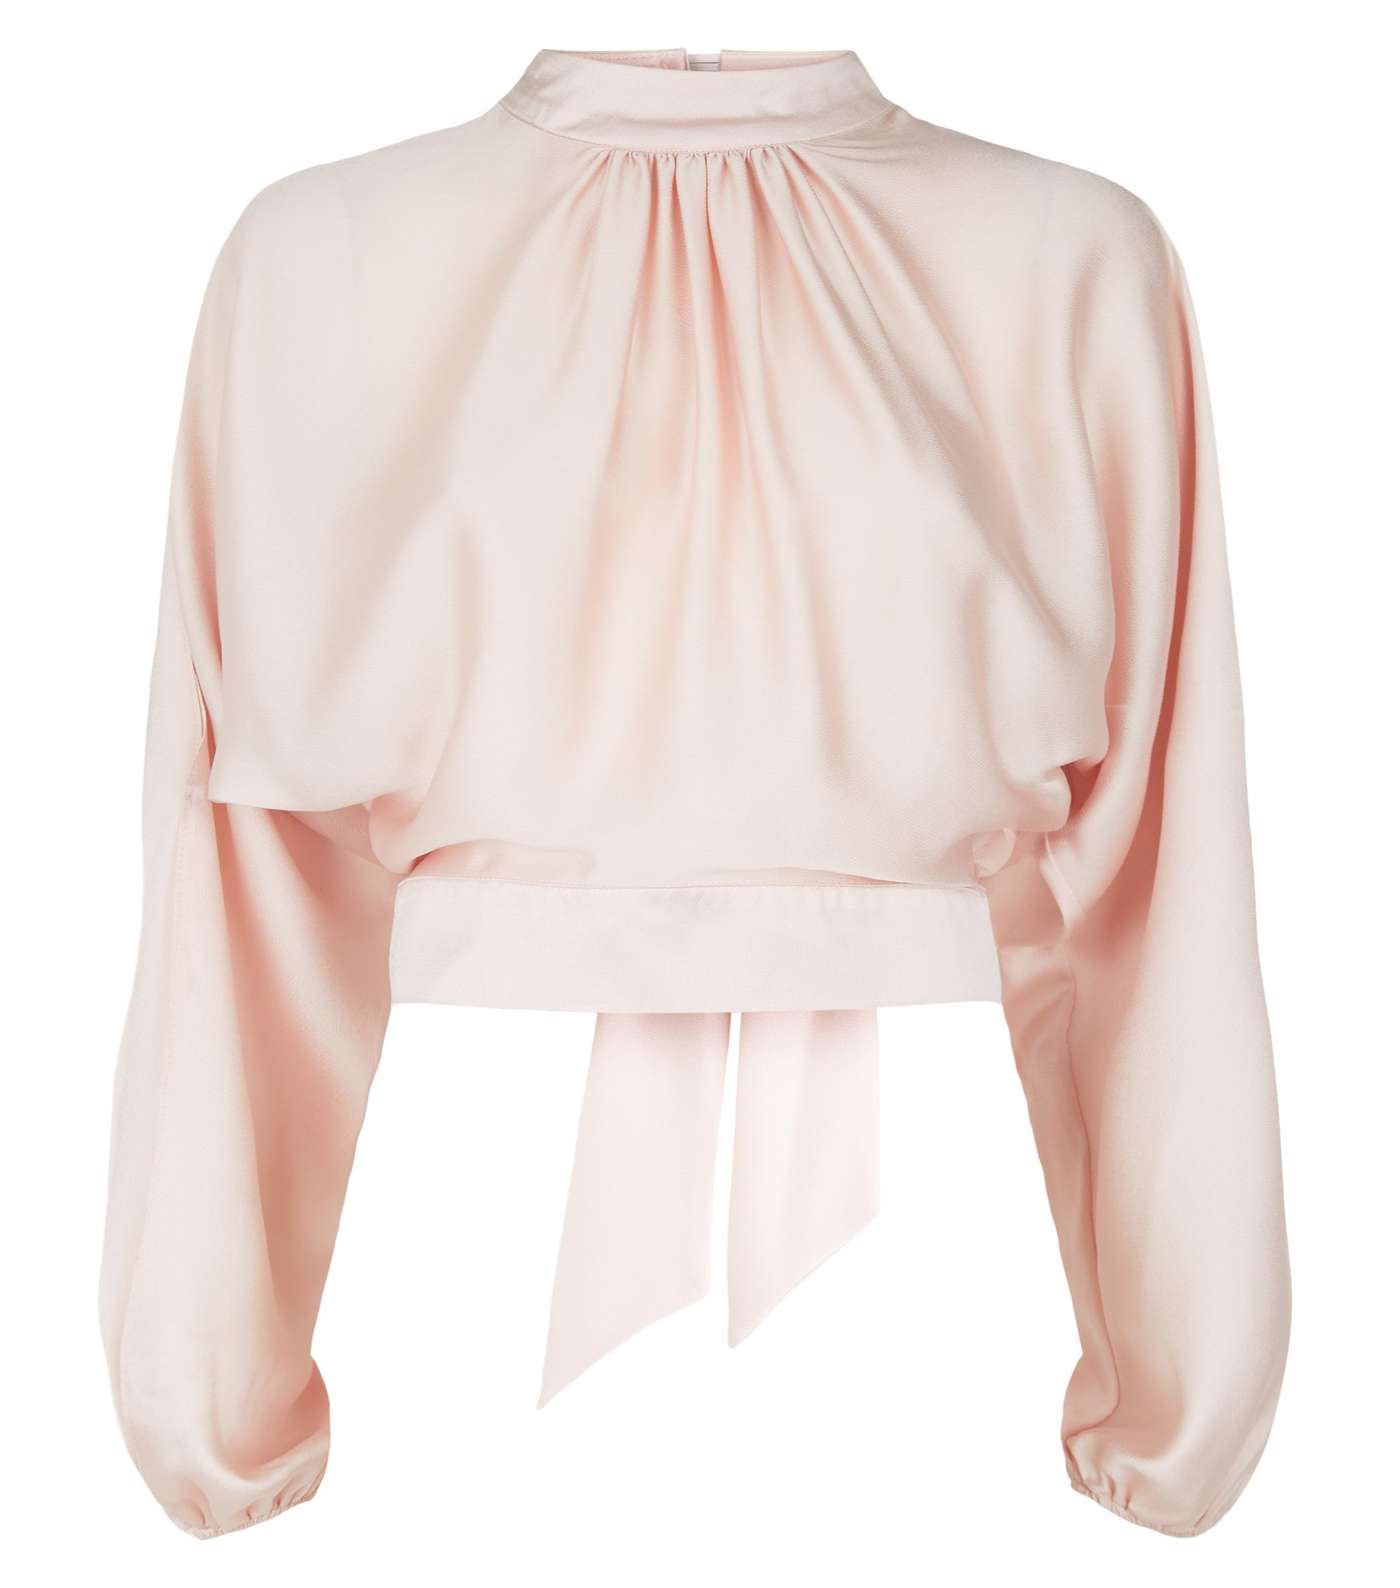 Pale Pink Satin Ruffle Tie Back Top Image 4